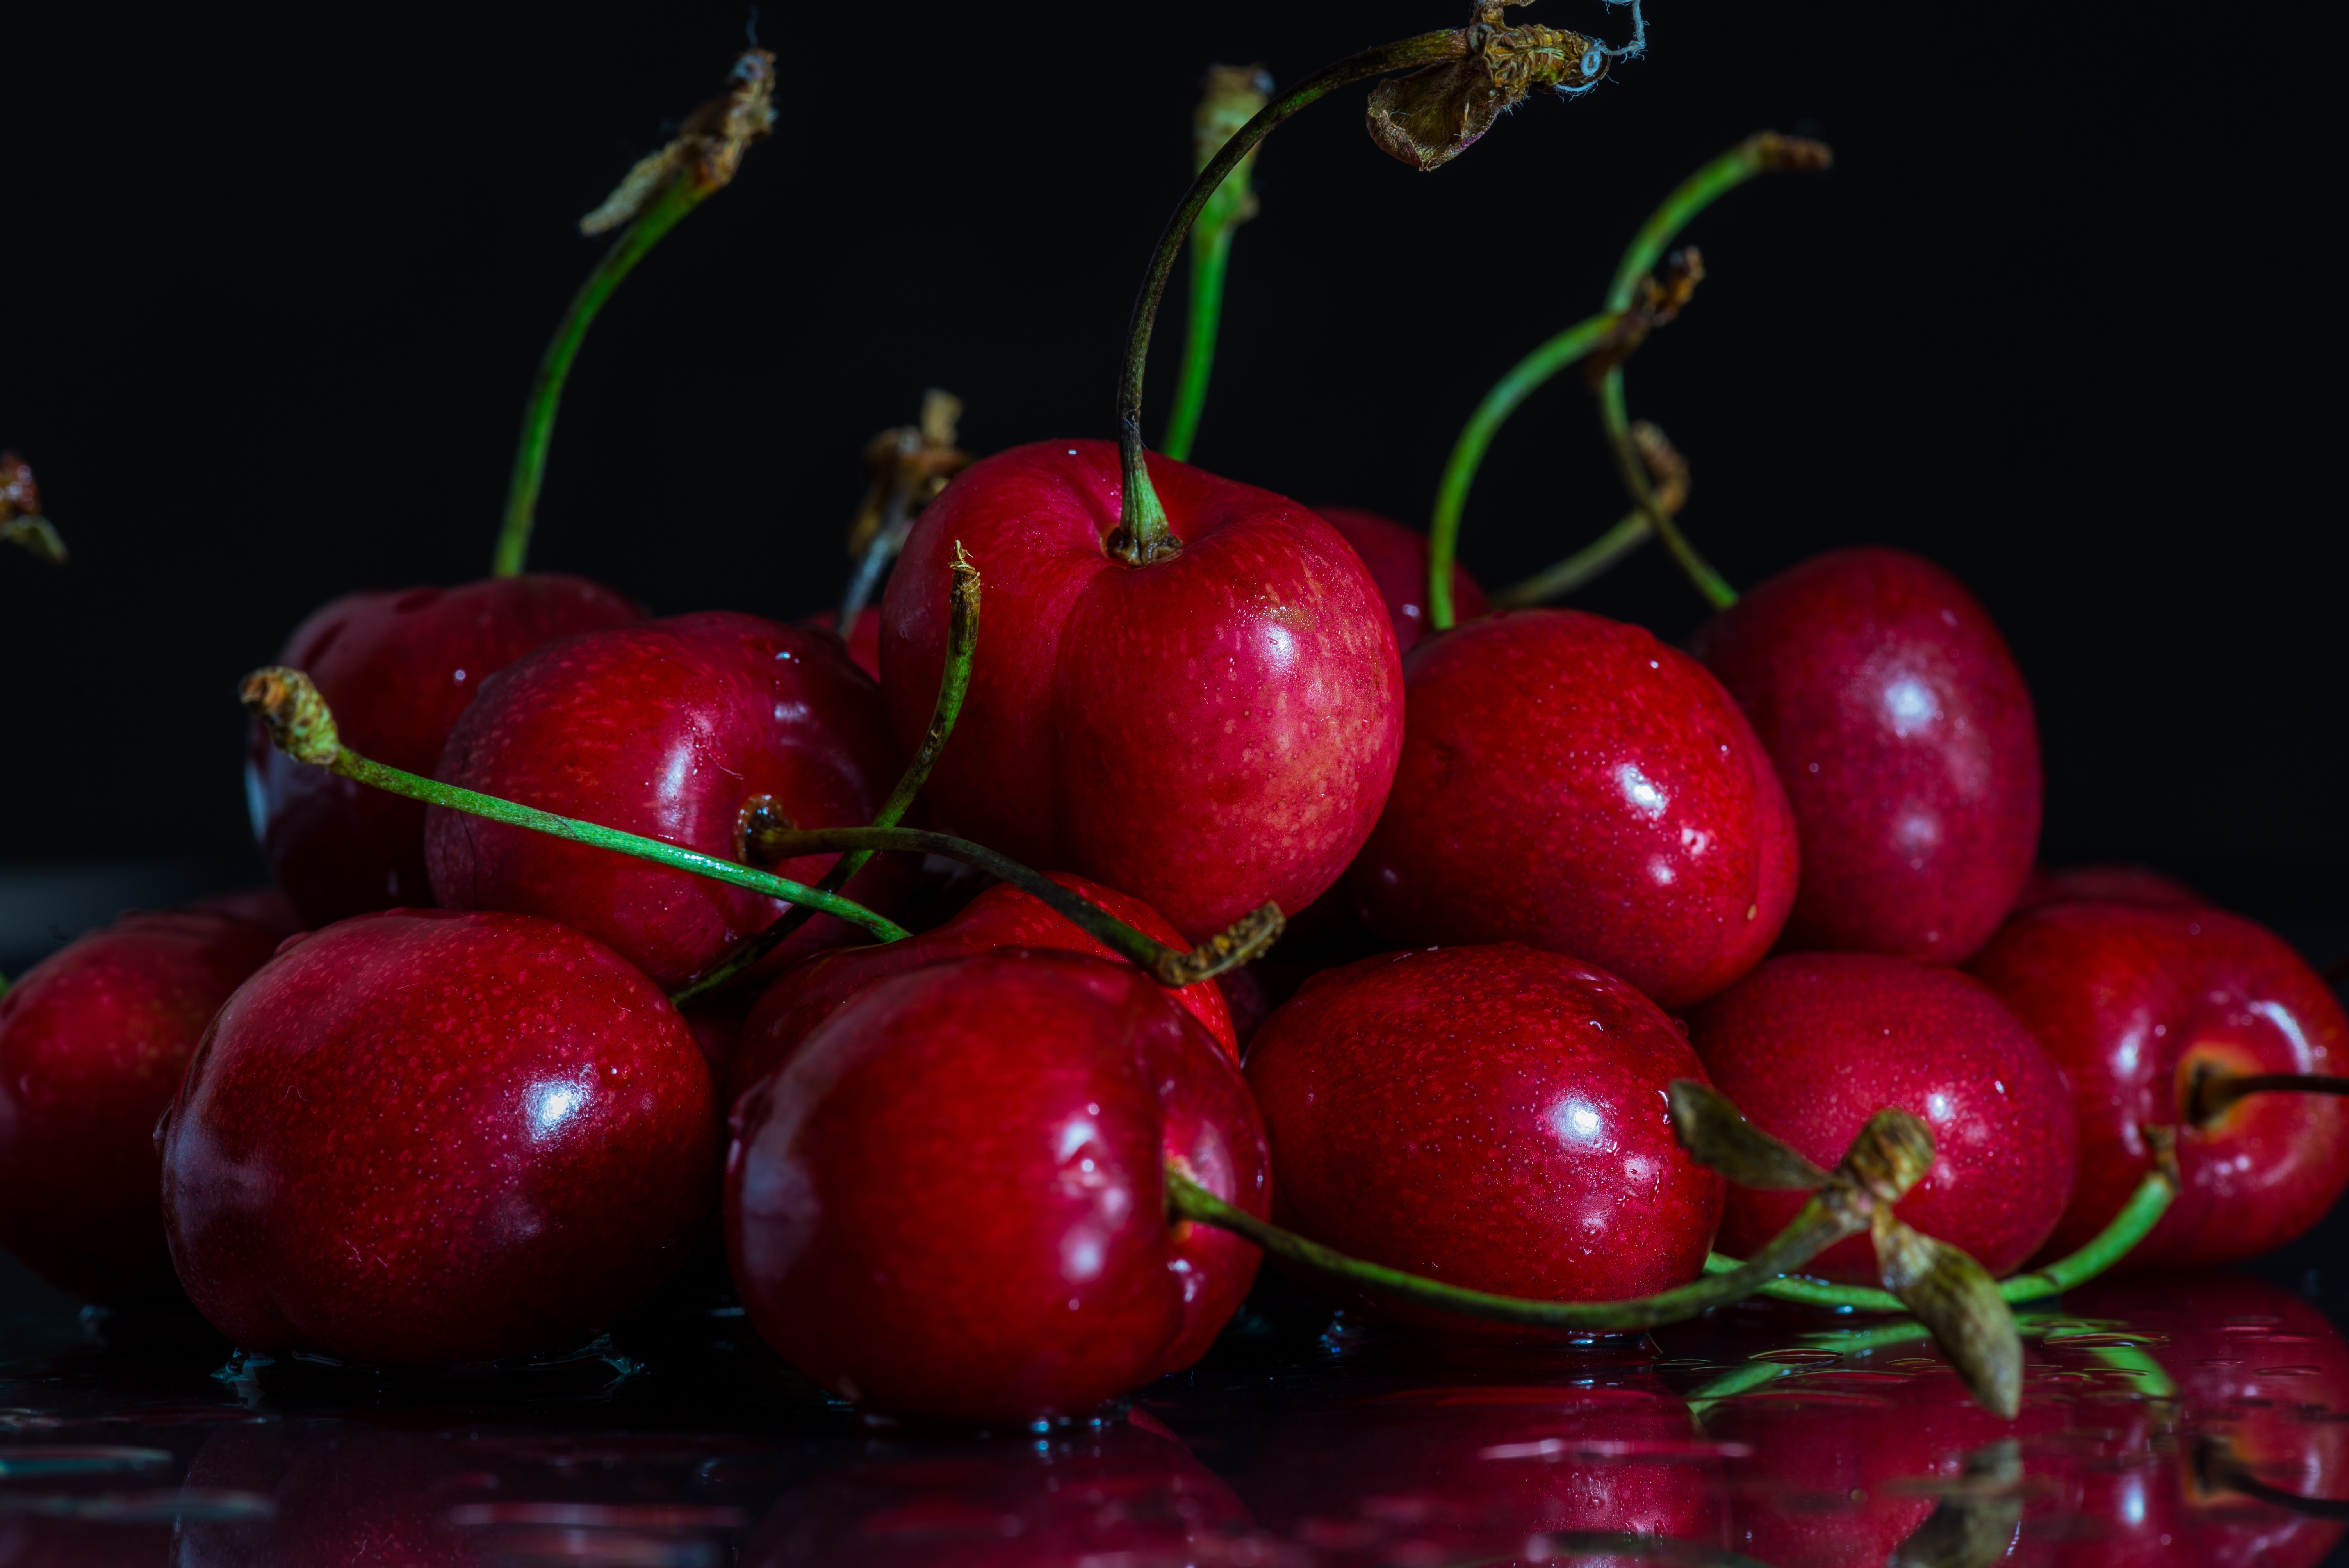 111504 download wallpaper fruits, food, cherry, red, wet, sweet, ripe, juicy, sweet cherries screensavers and pictures for free